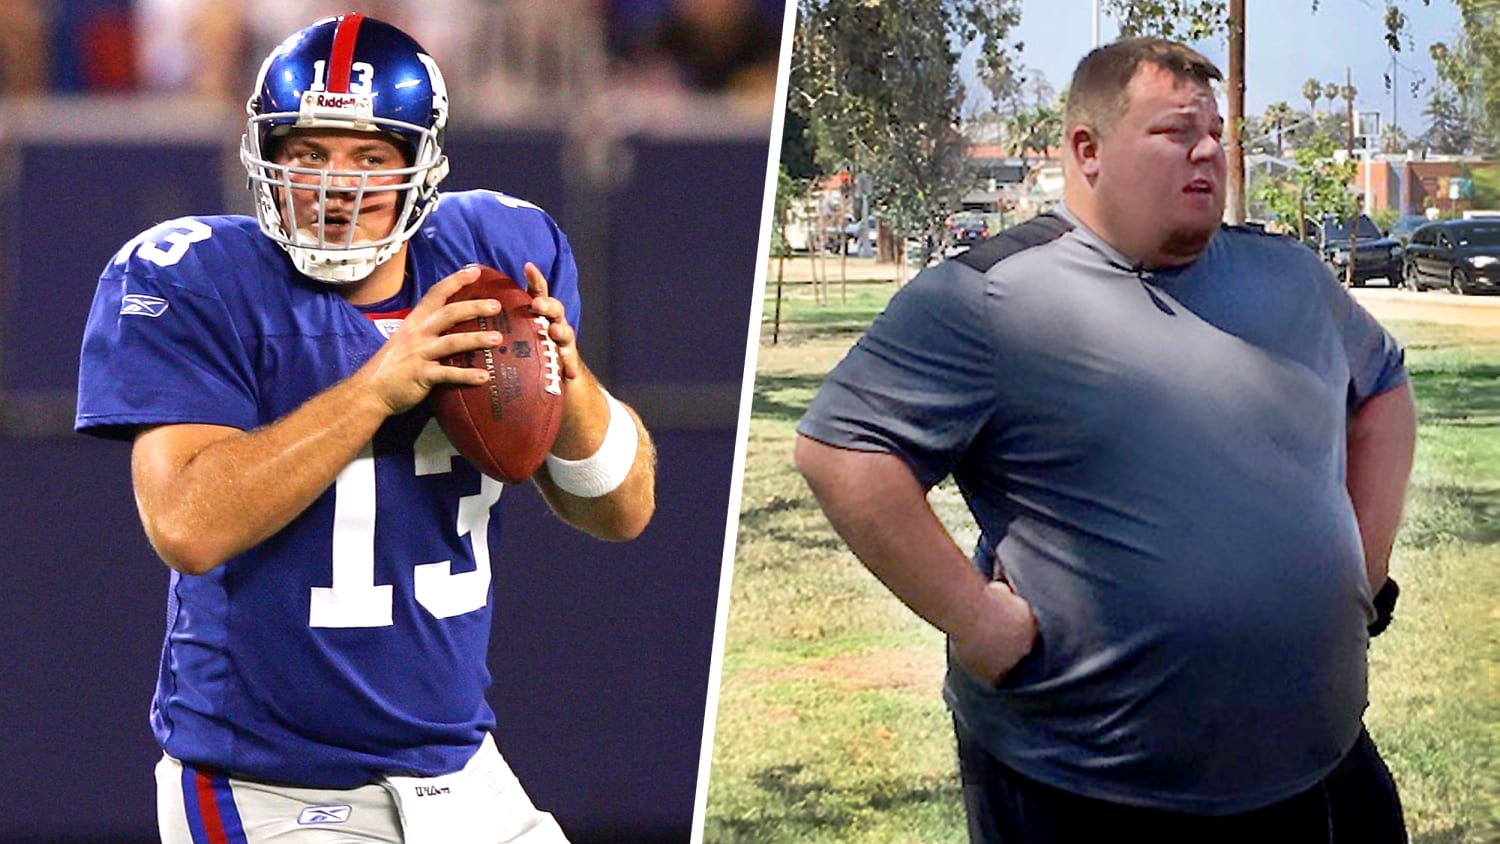 Now 500 Pounds Former Giants Qb Jared Lorenzen Goes To